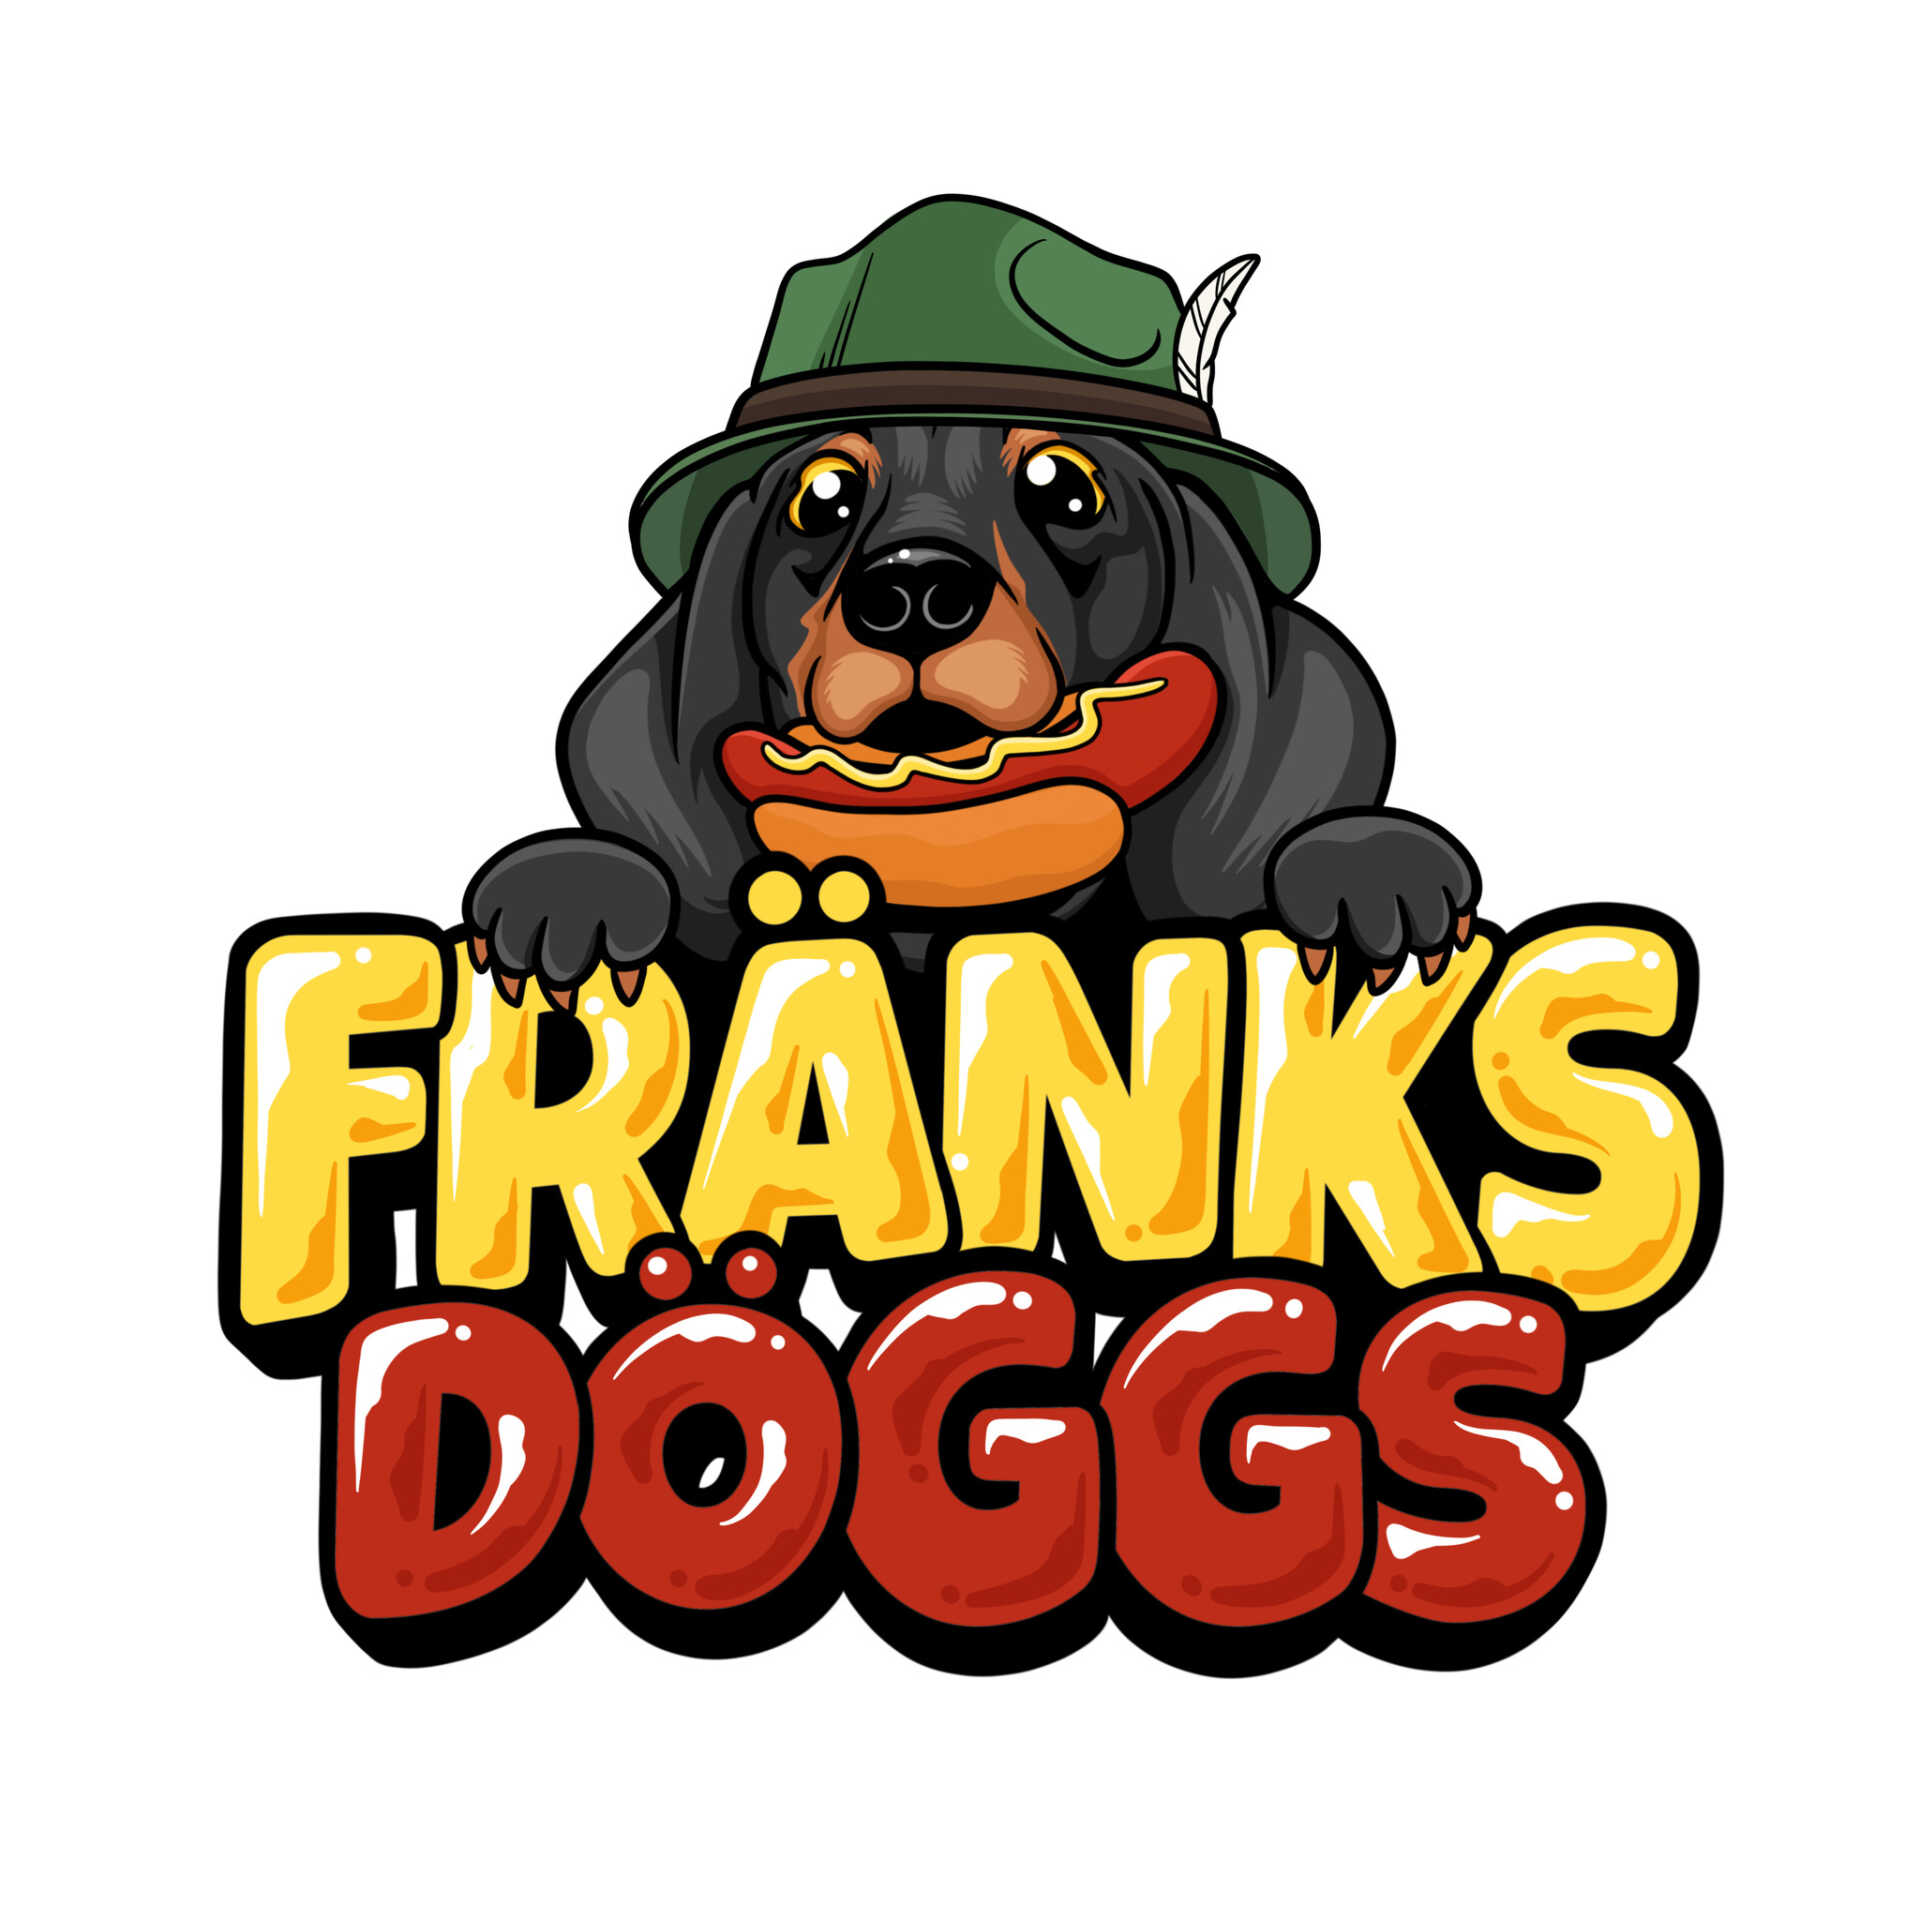 Franks Doggs-banner-image